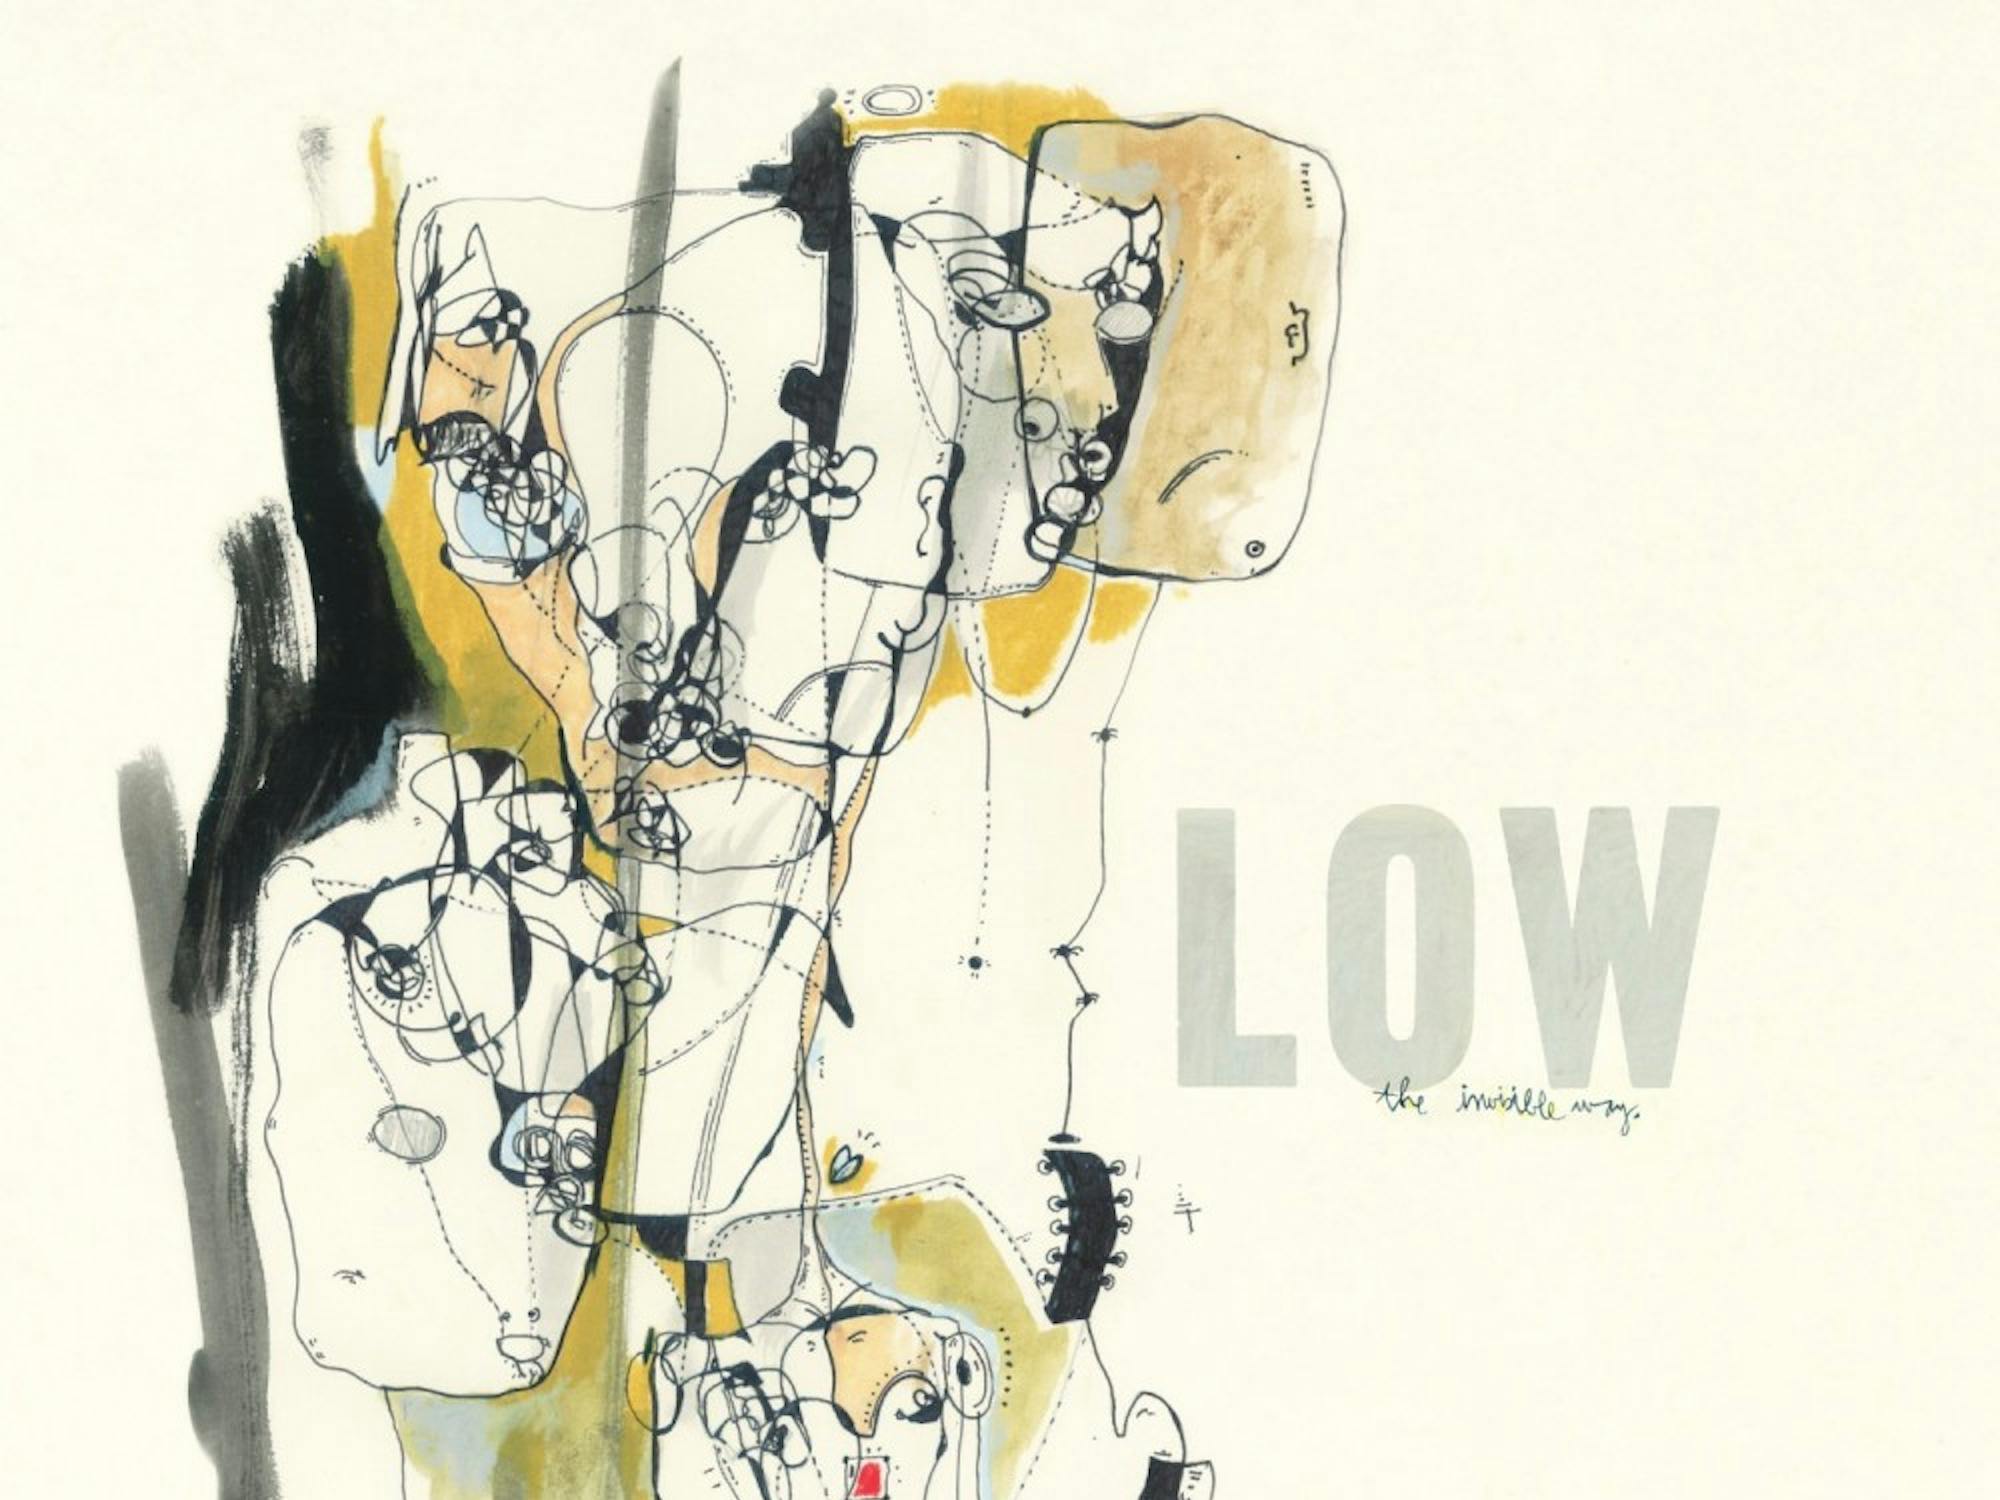 	The songs in Low’s new album, ‘The Invisible Way,’ work splendidly.